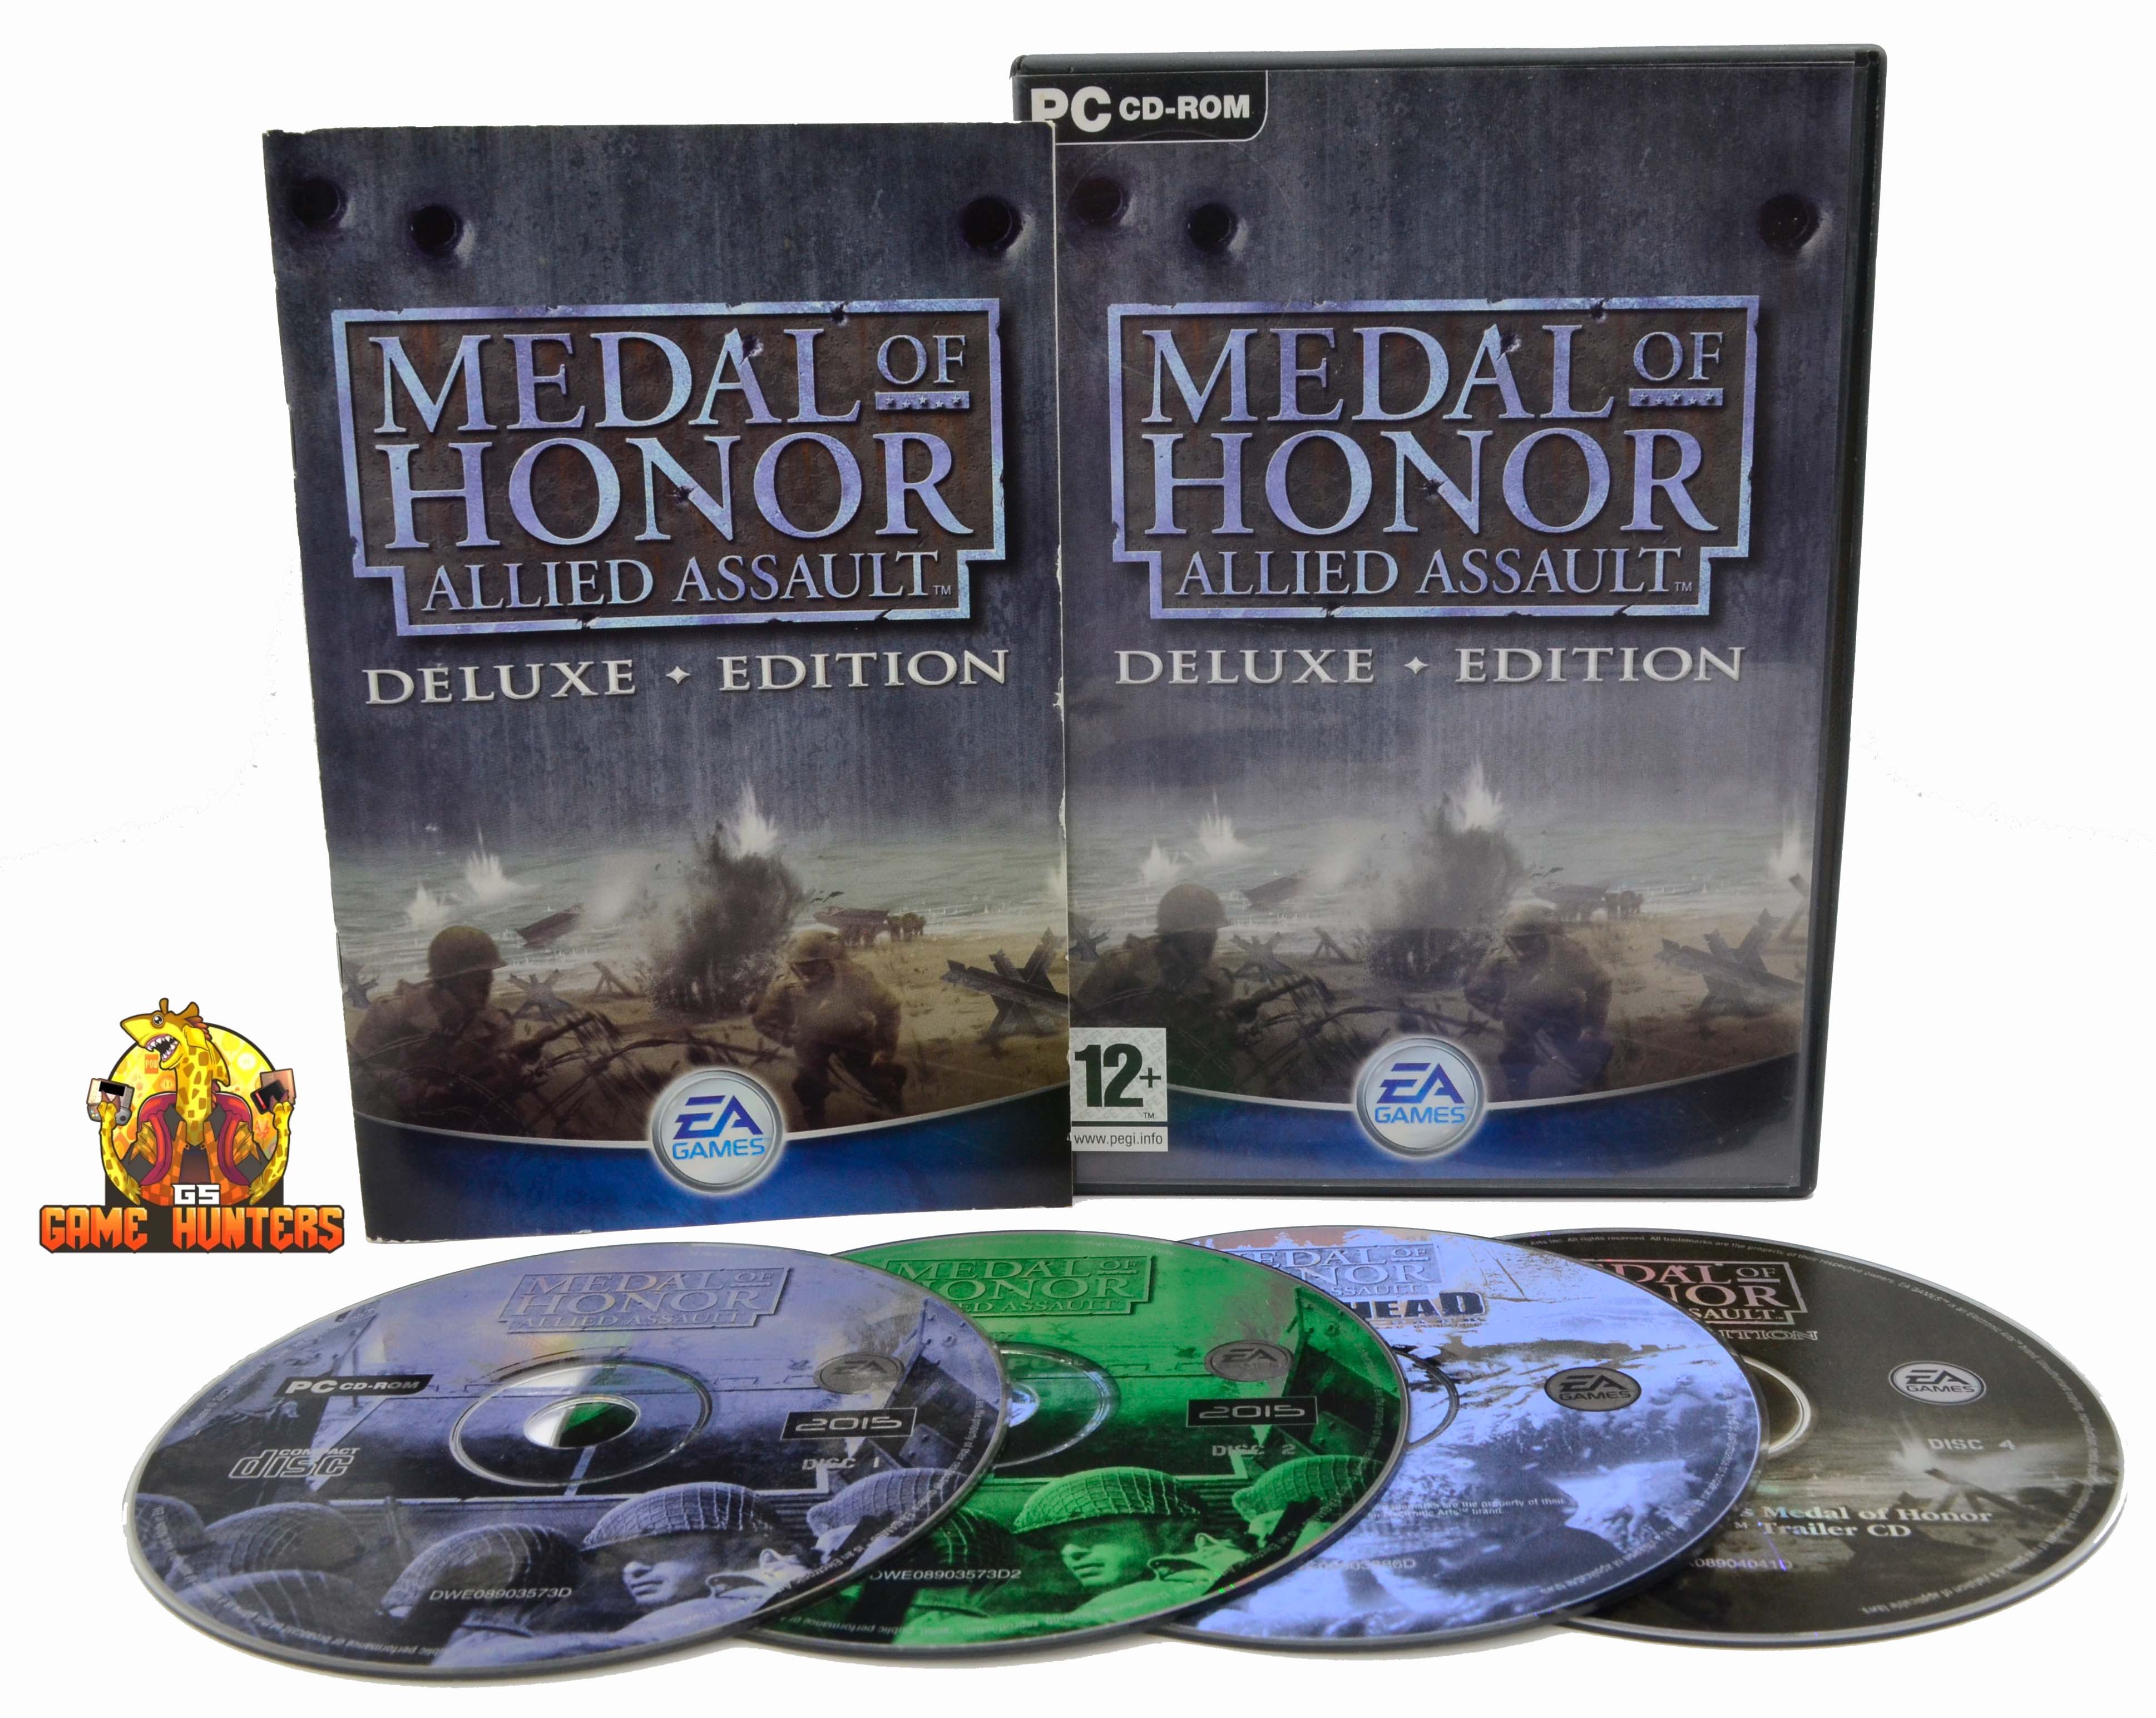 Medal of Honor Allied Assault Breakthrough Expansion Pack Case, Manual & Discs.jpg  by GSGAMEHUNTERS